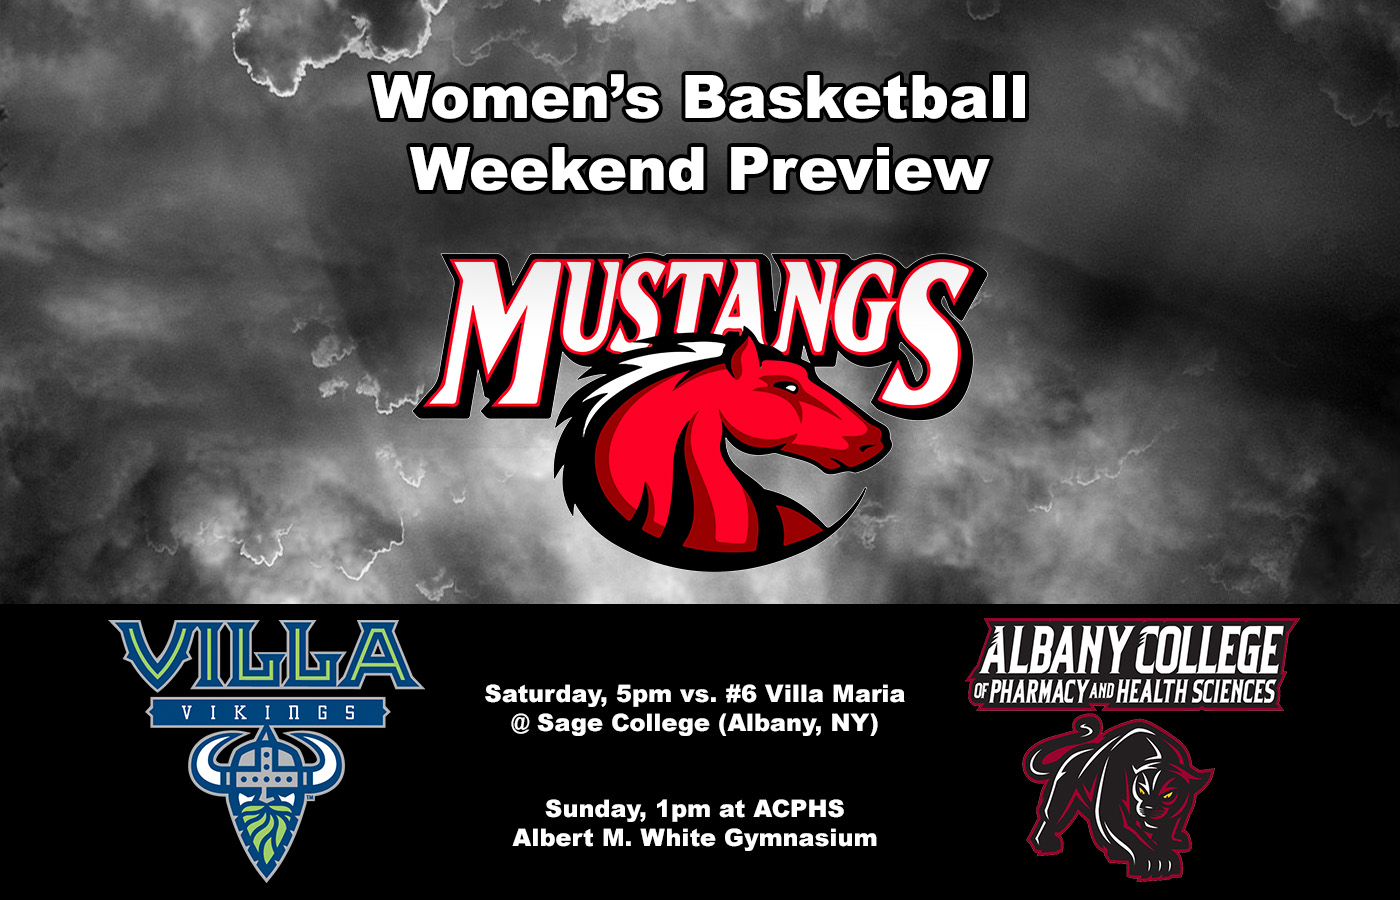 Women's Basketball heading to Albany, NY for weekend double-header